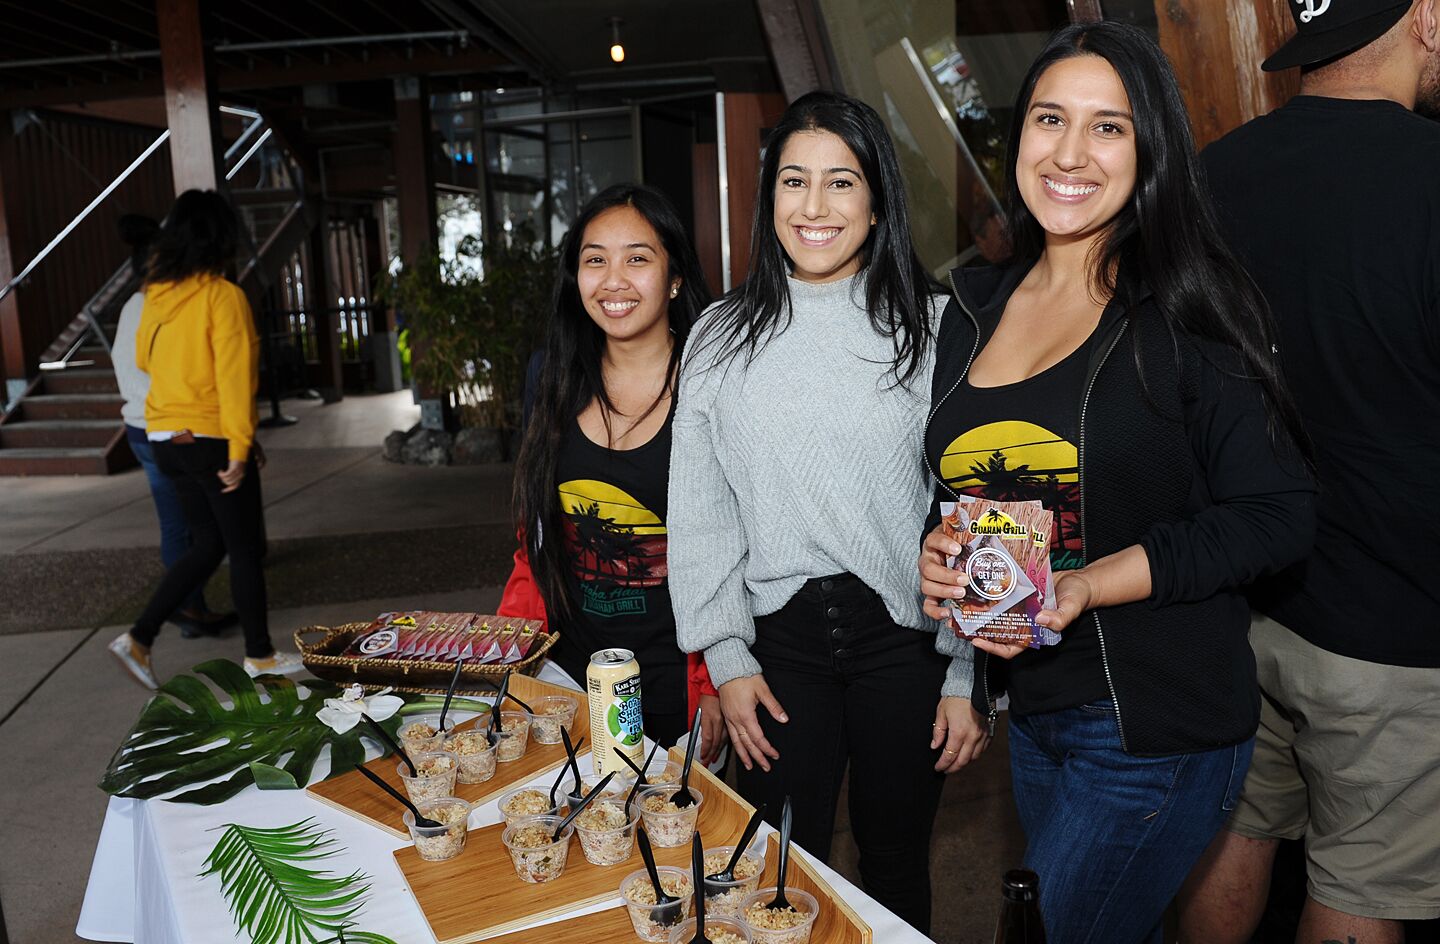 There was poke for days at the 10th annual I Love Poke San Diego 2019, a poke tasting event and competition featuring 30+ of the city's finest chefs and restaurants at the Bali Hai Restaurant on Shelter Island on Tuesday, May 21, 2019.